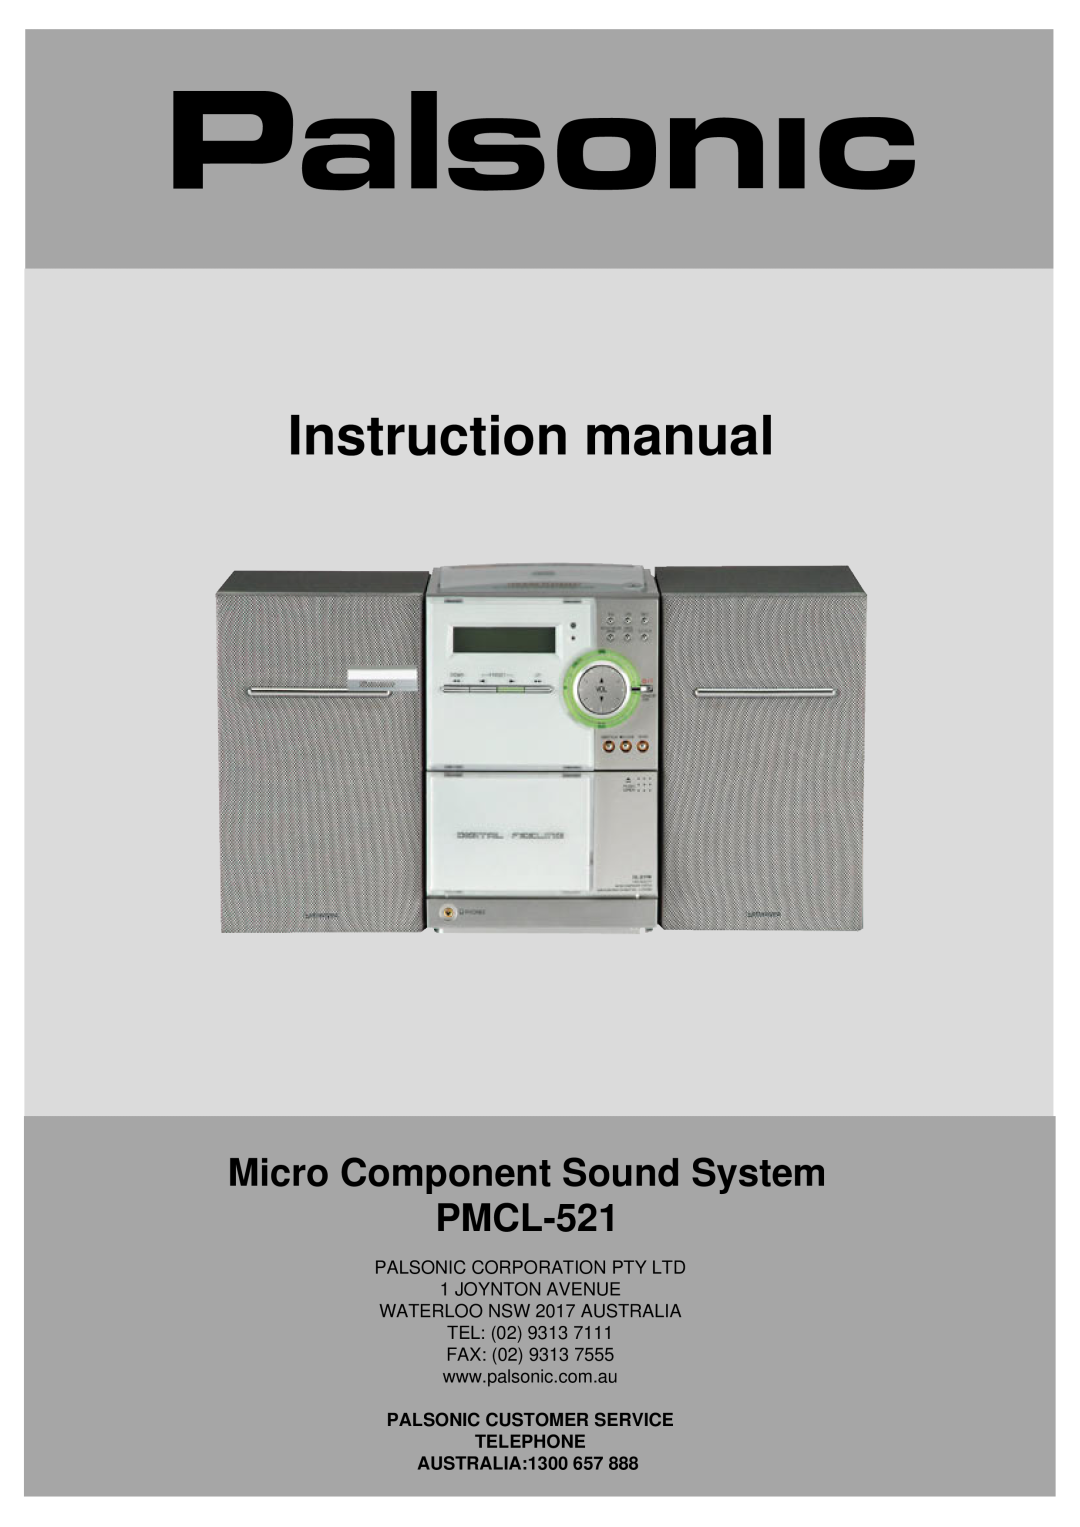 Palsonic instruction manual Palsonic Customer Service Telephone, Australia, Micro Component Sound System PMCL-521 